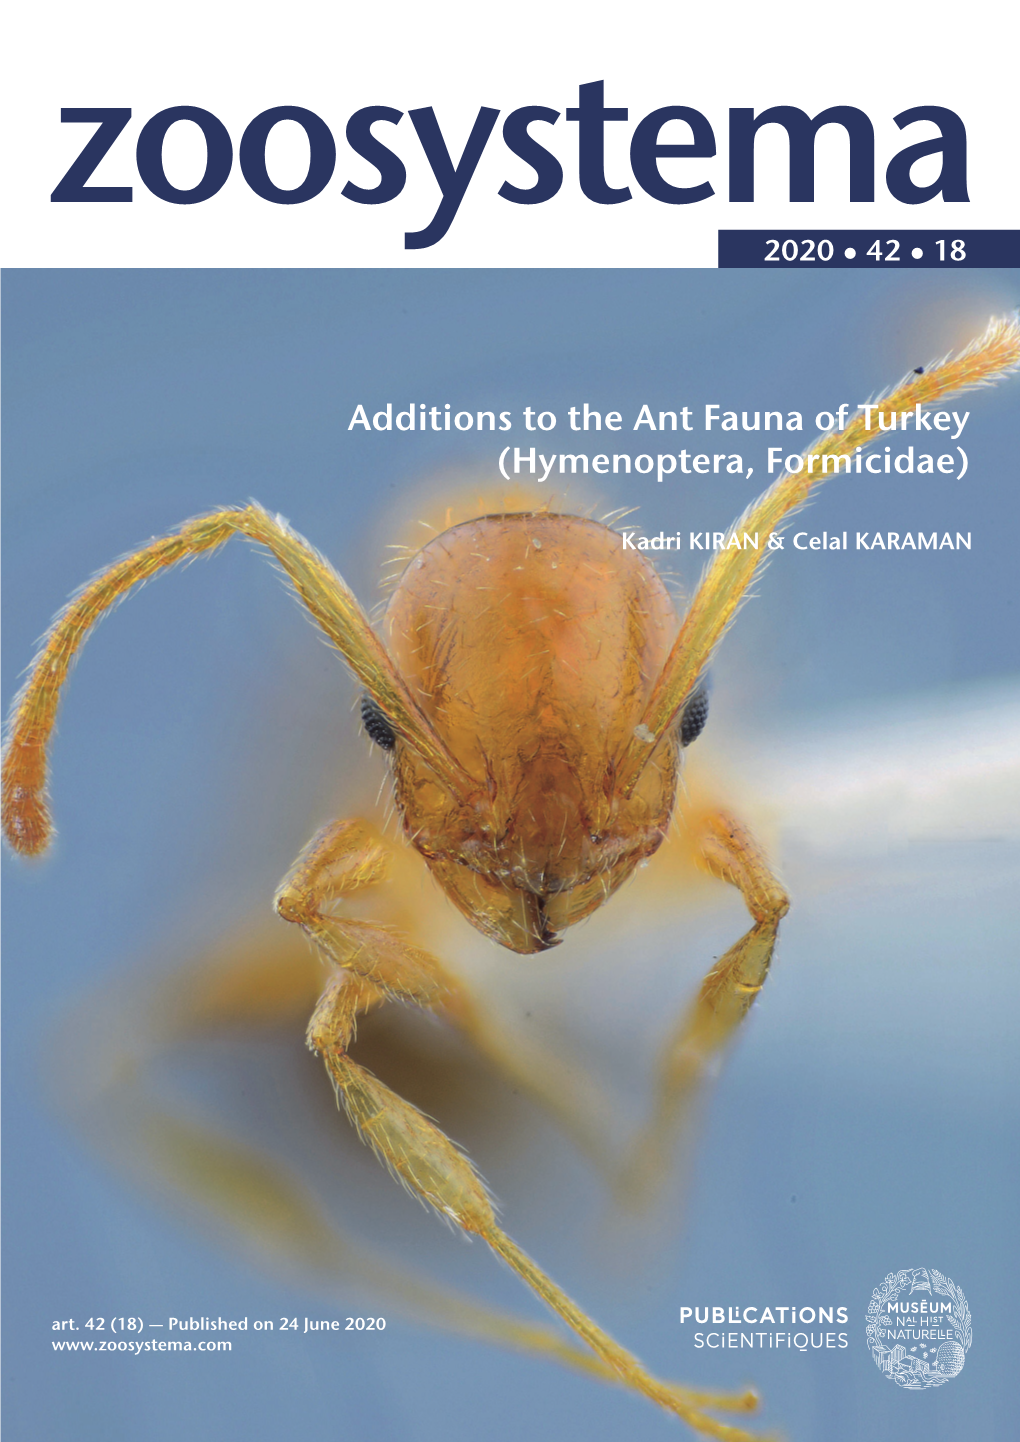 Additions to the Ant Fauna of Turkey (Hymenoptera, Formicidae)